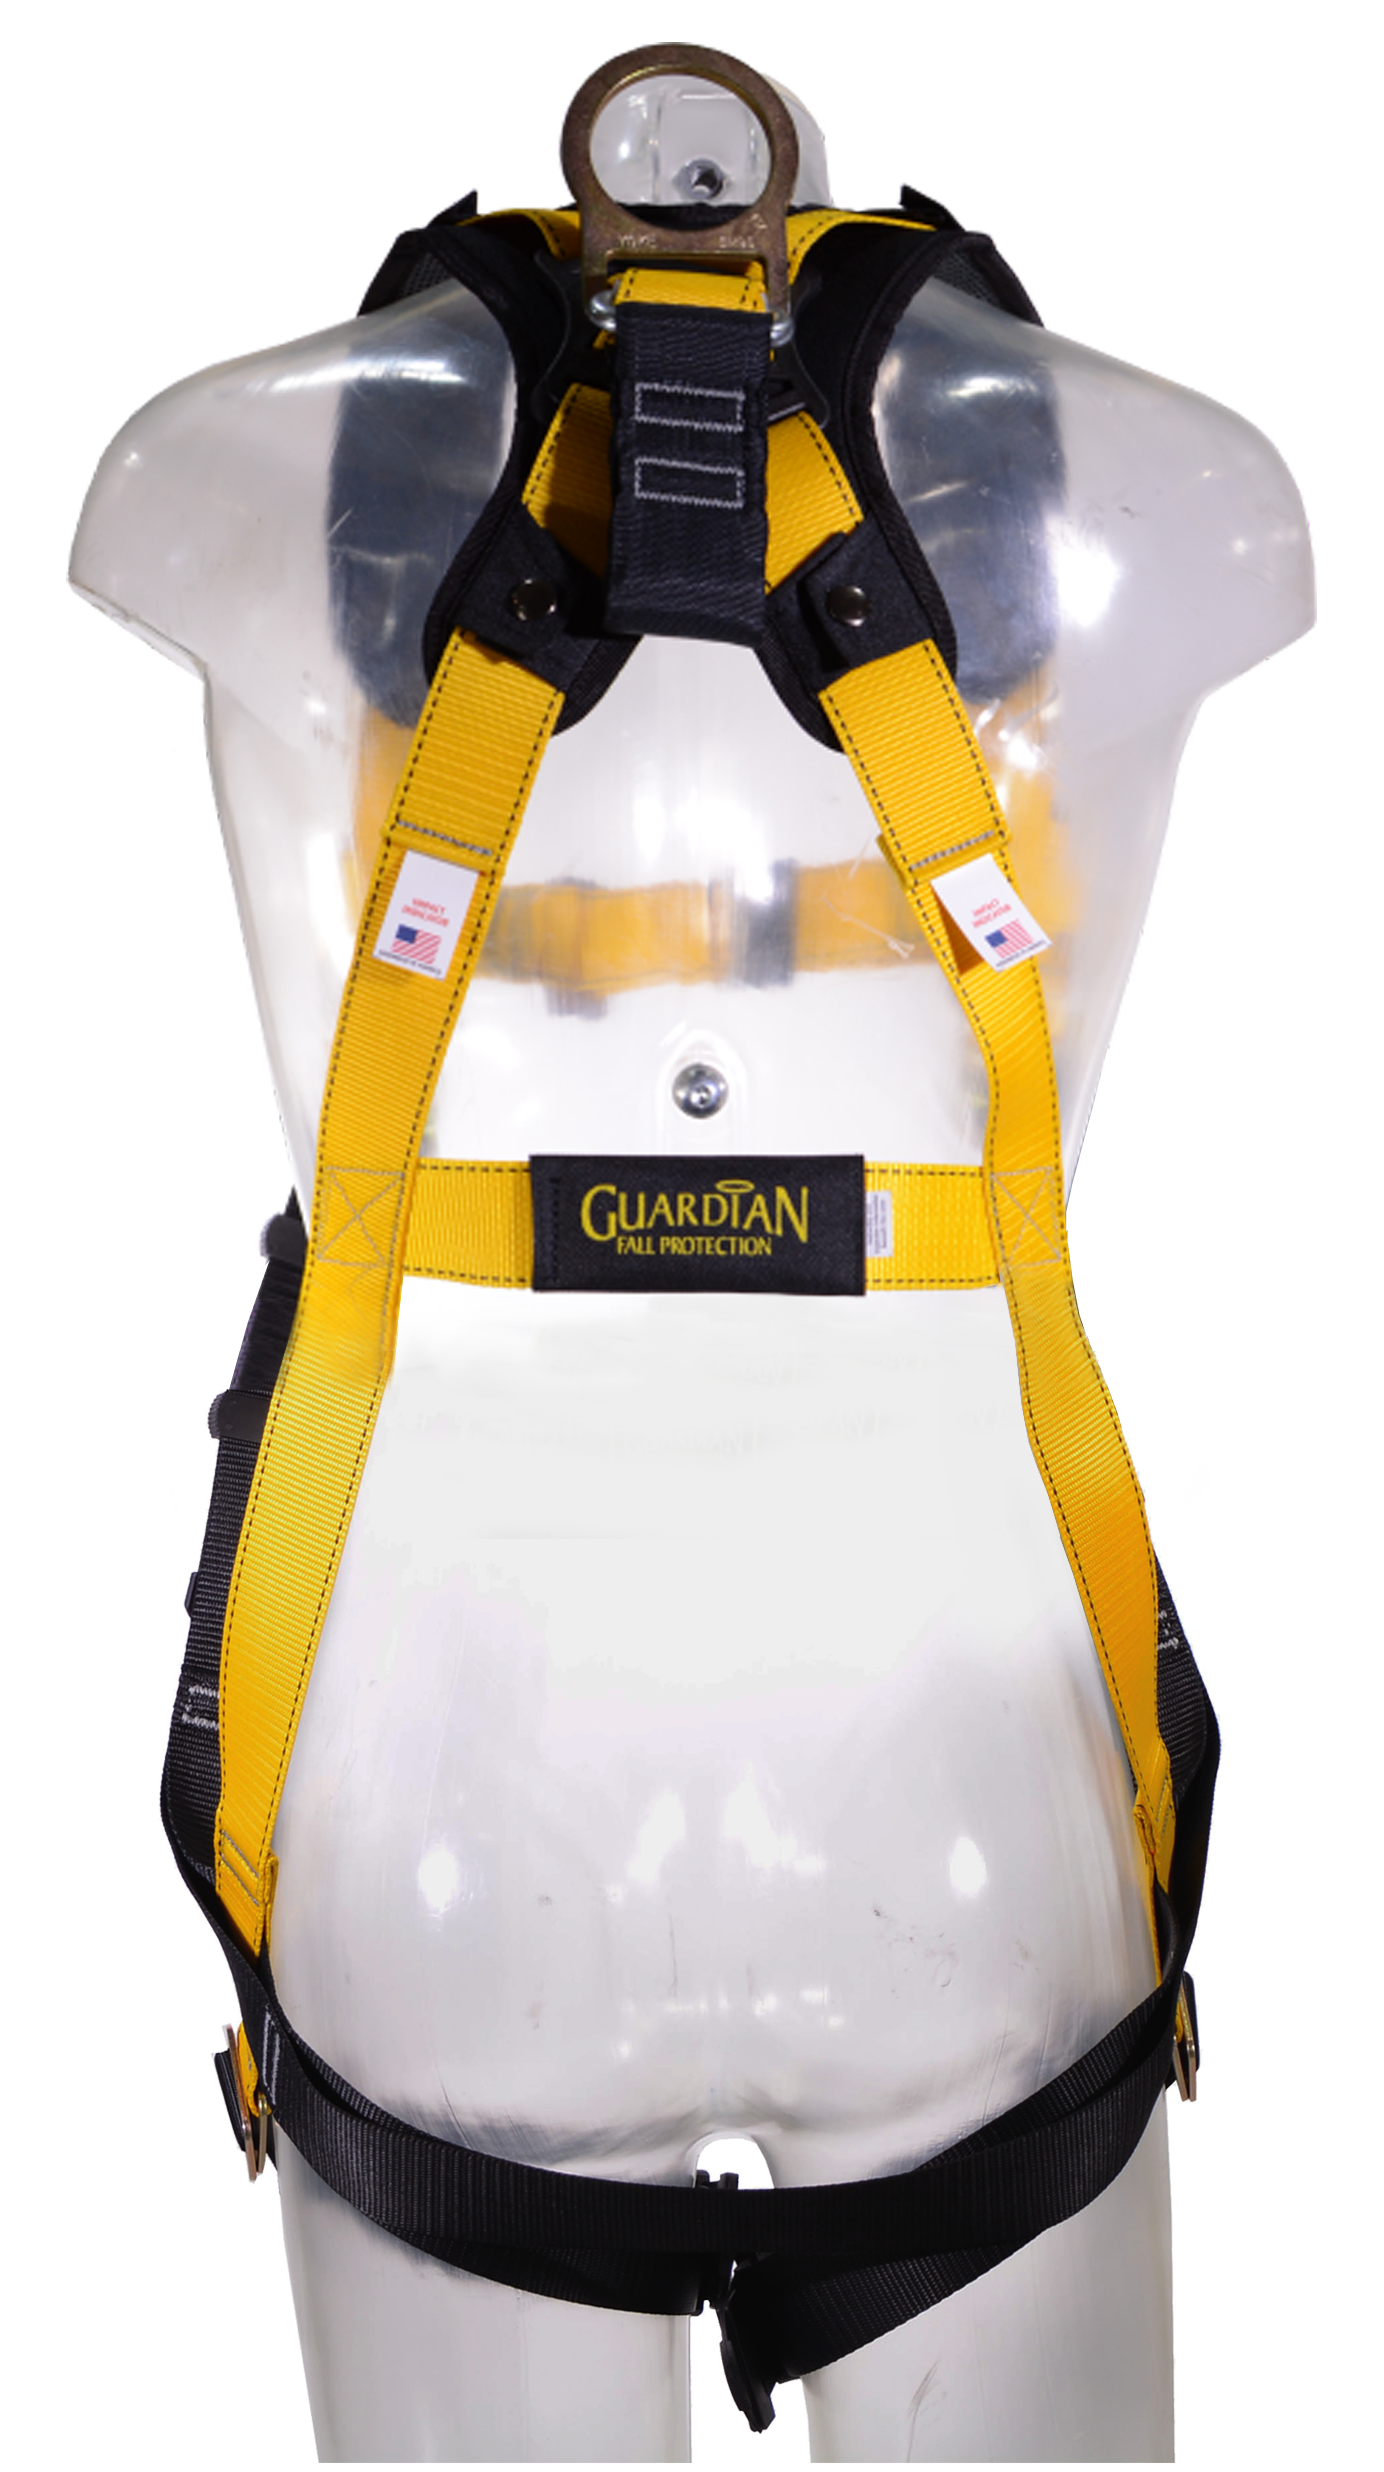 Guardian Series 3 Full-Body Harness, Quick-Connect Chest, Tongue-Buckle Legs,  Sternal D-Ring